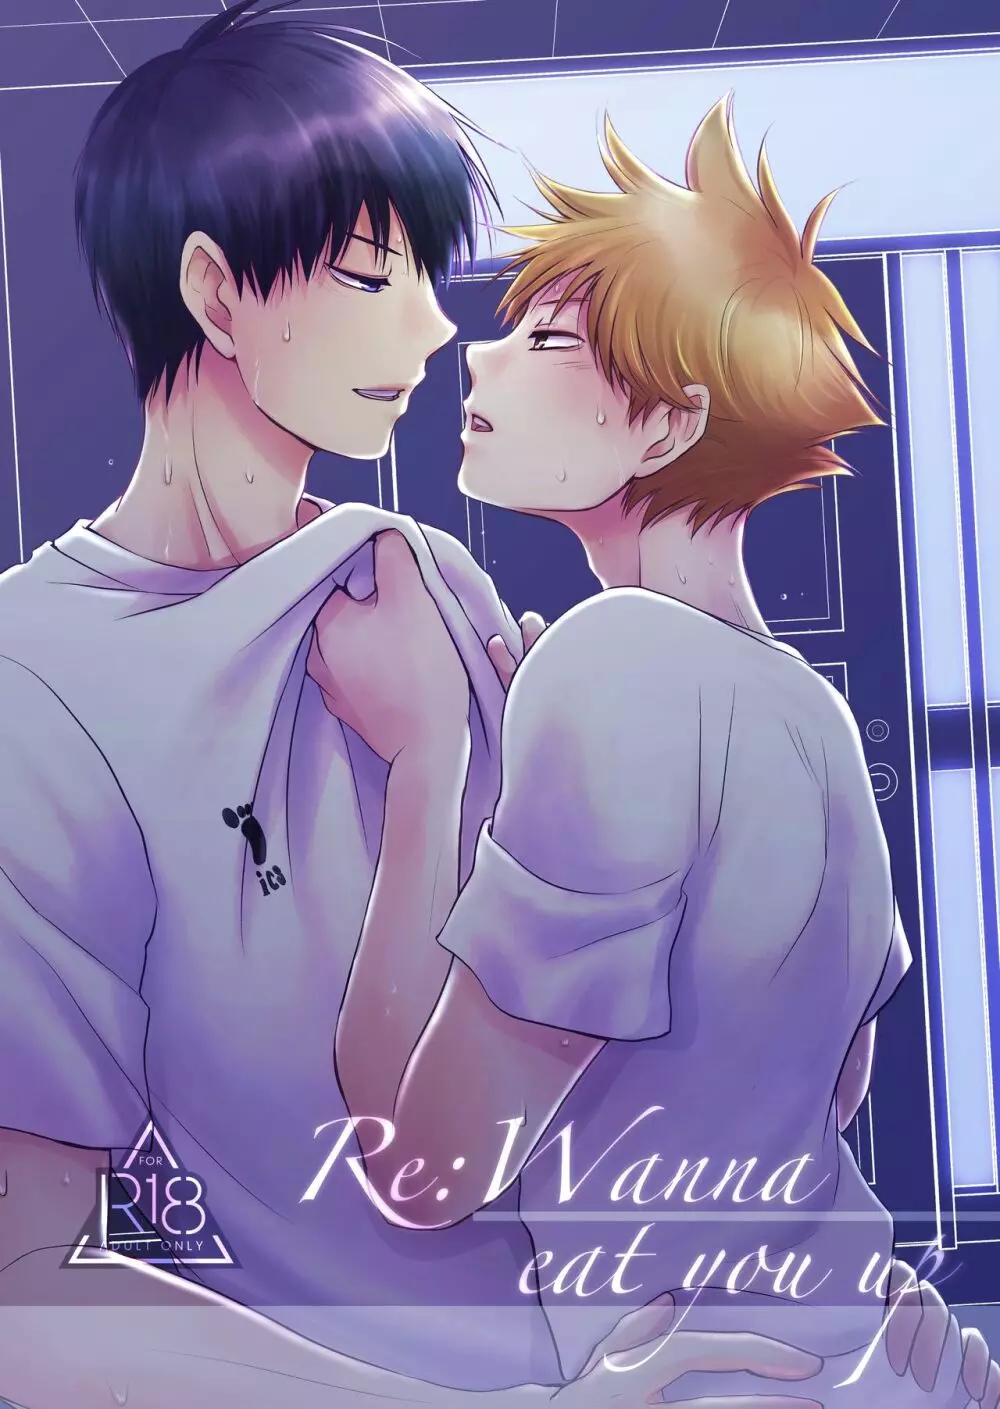 Re:Wanna eat you up 1ページ